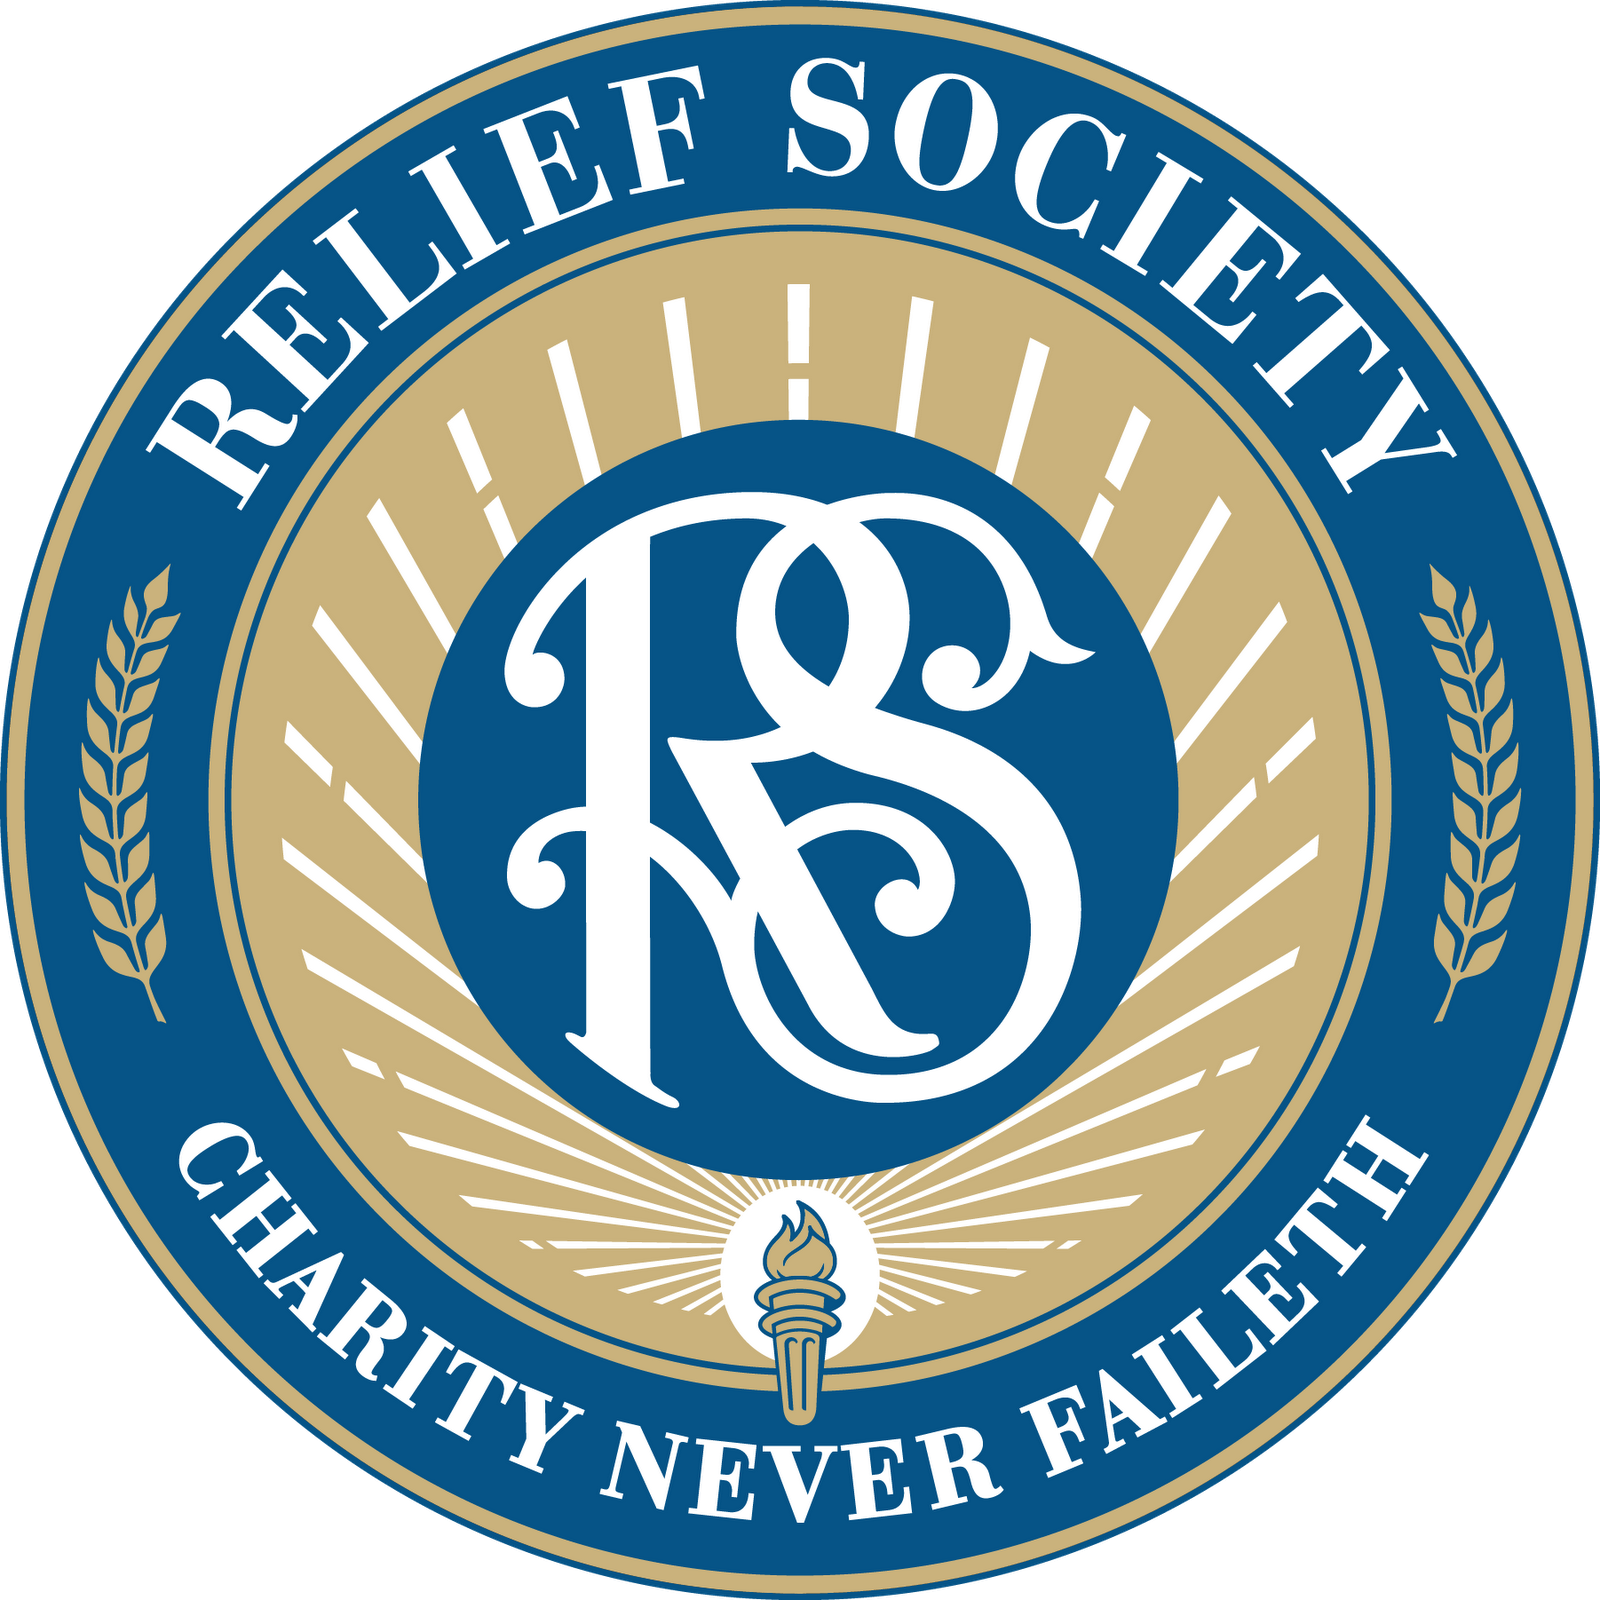 Lds Relief Society Sisters Clip Art